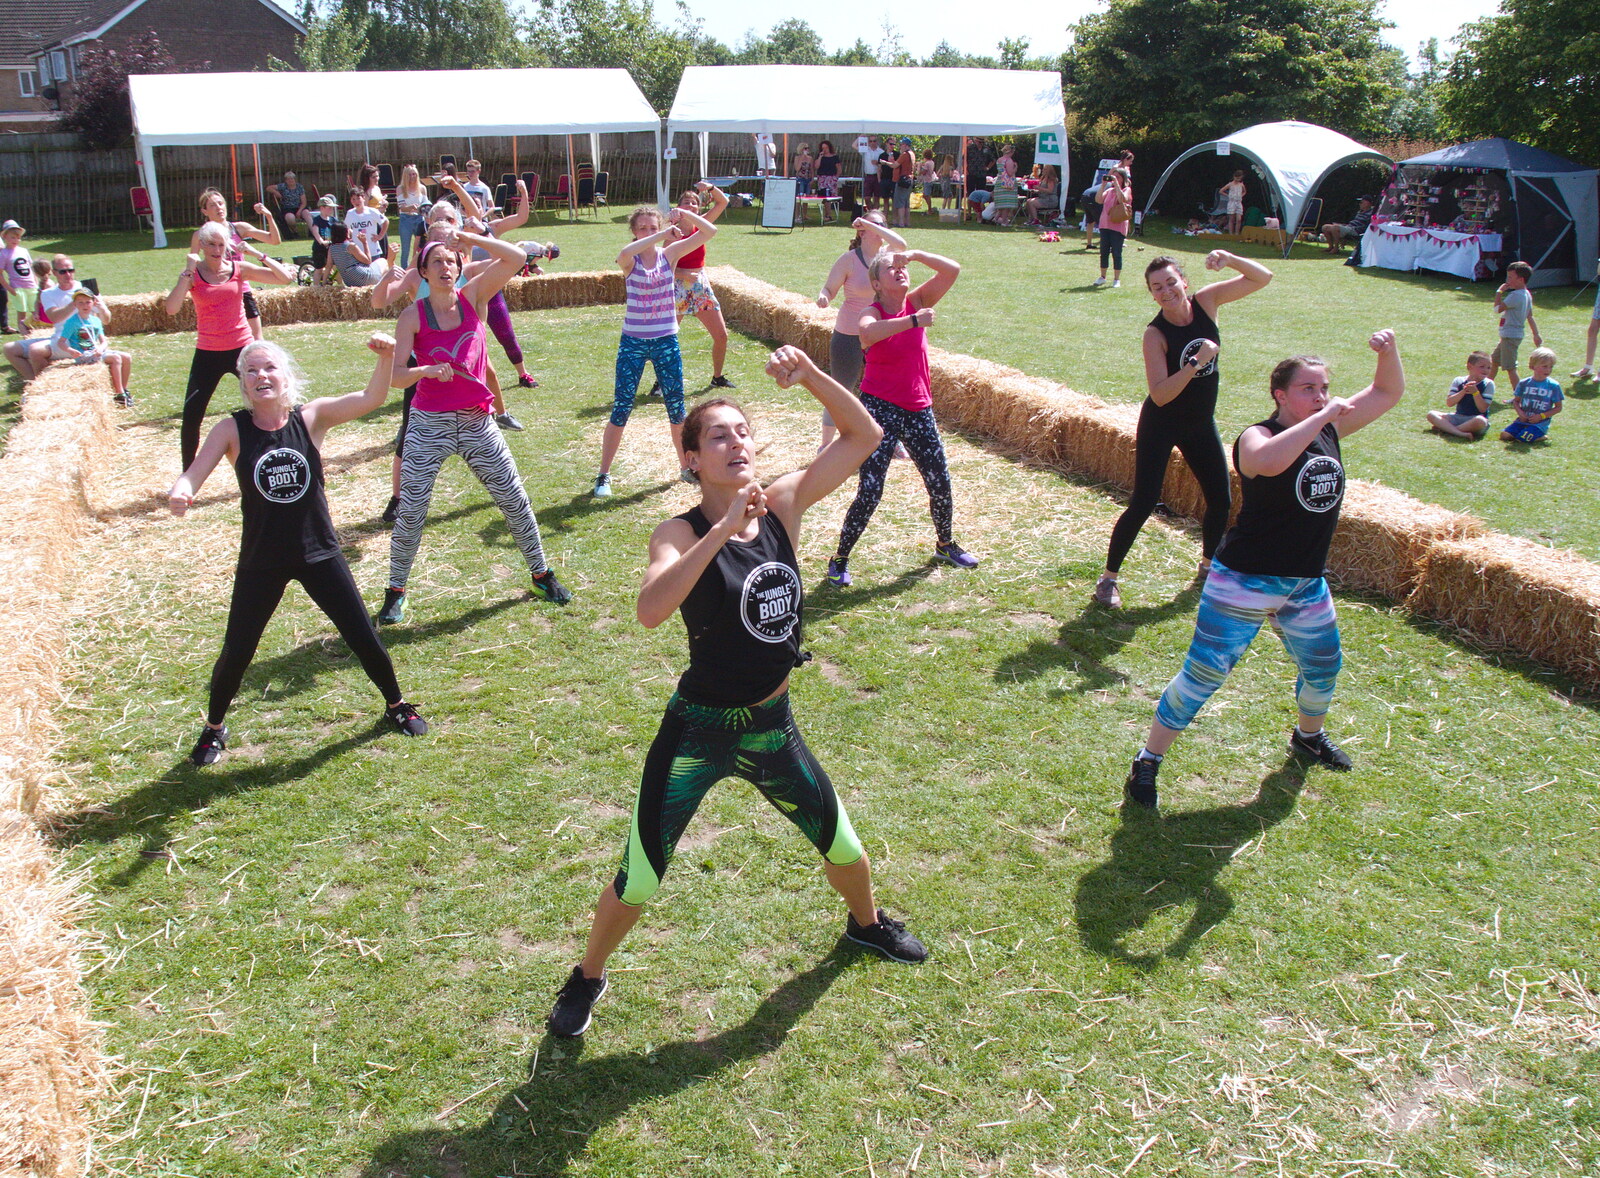 The fitness group 'Jungle Body' does a demo from GSB and the Gislingham Fete, Suffolk - 29th June 2019